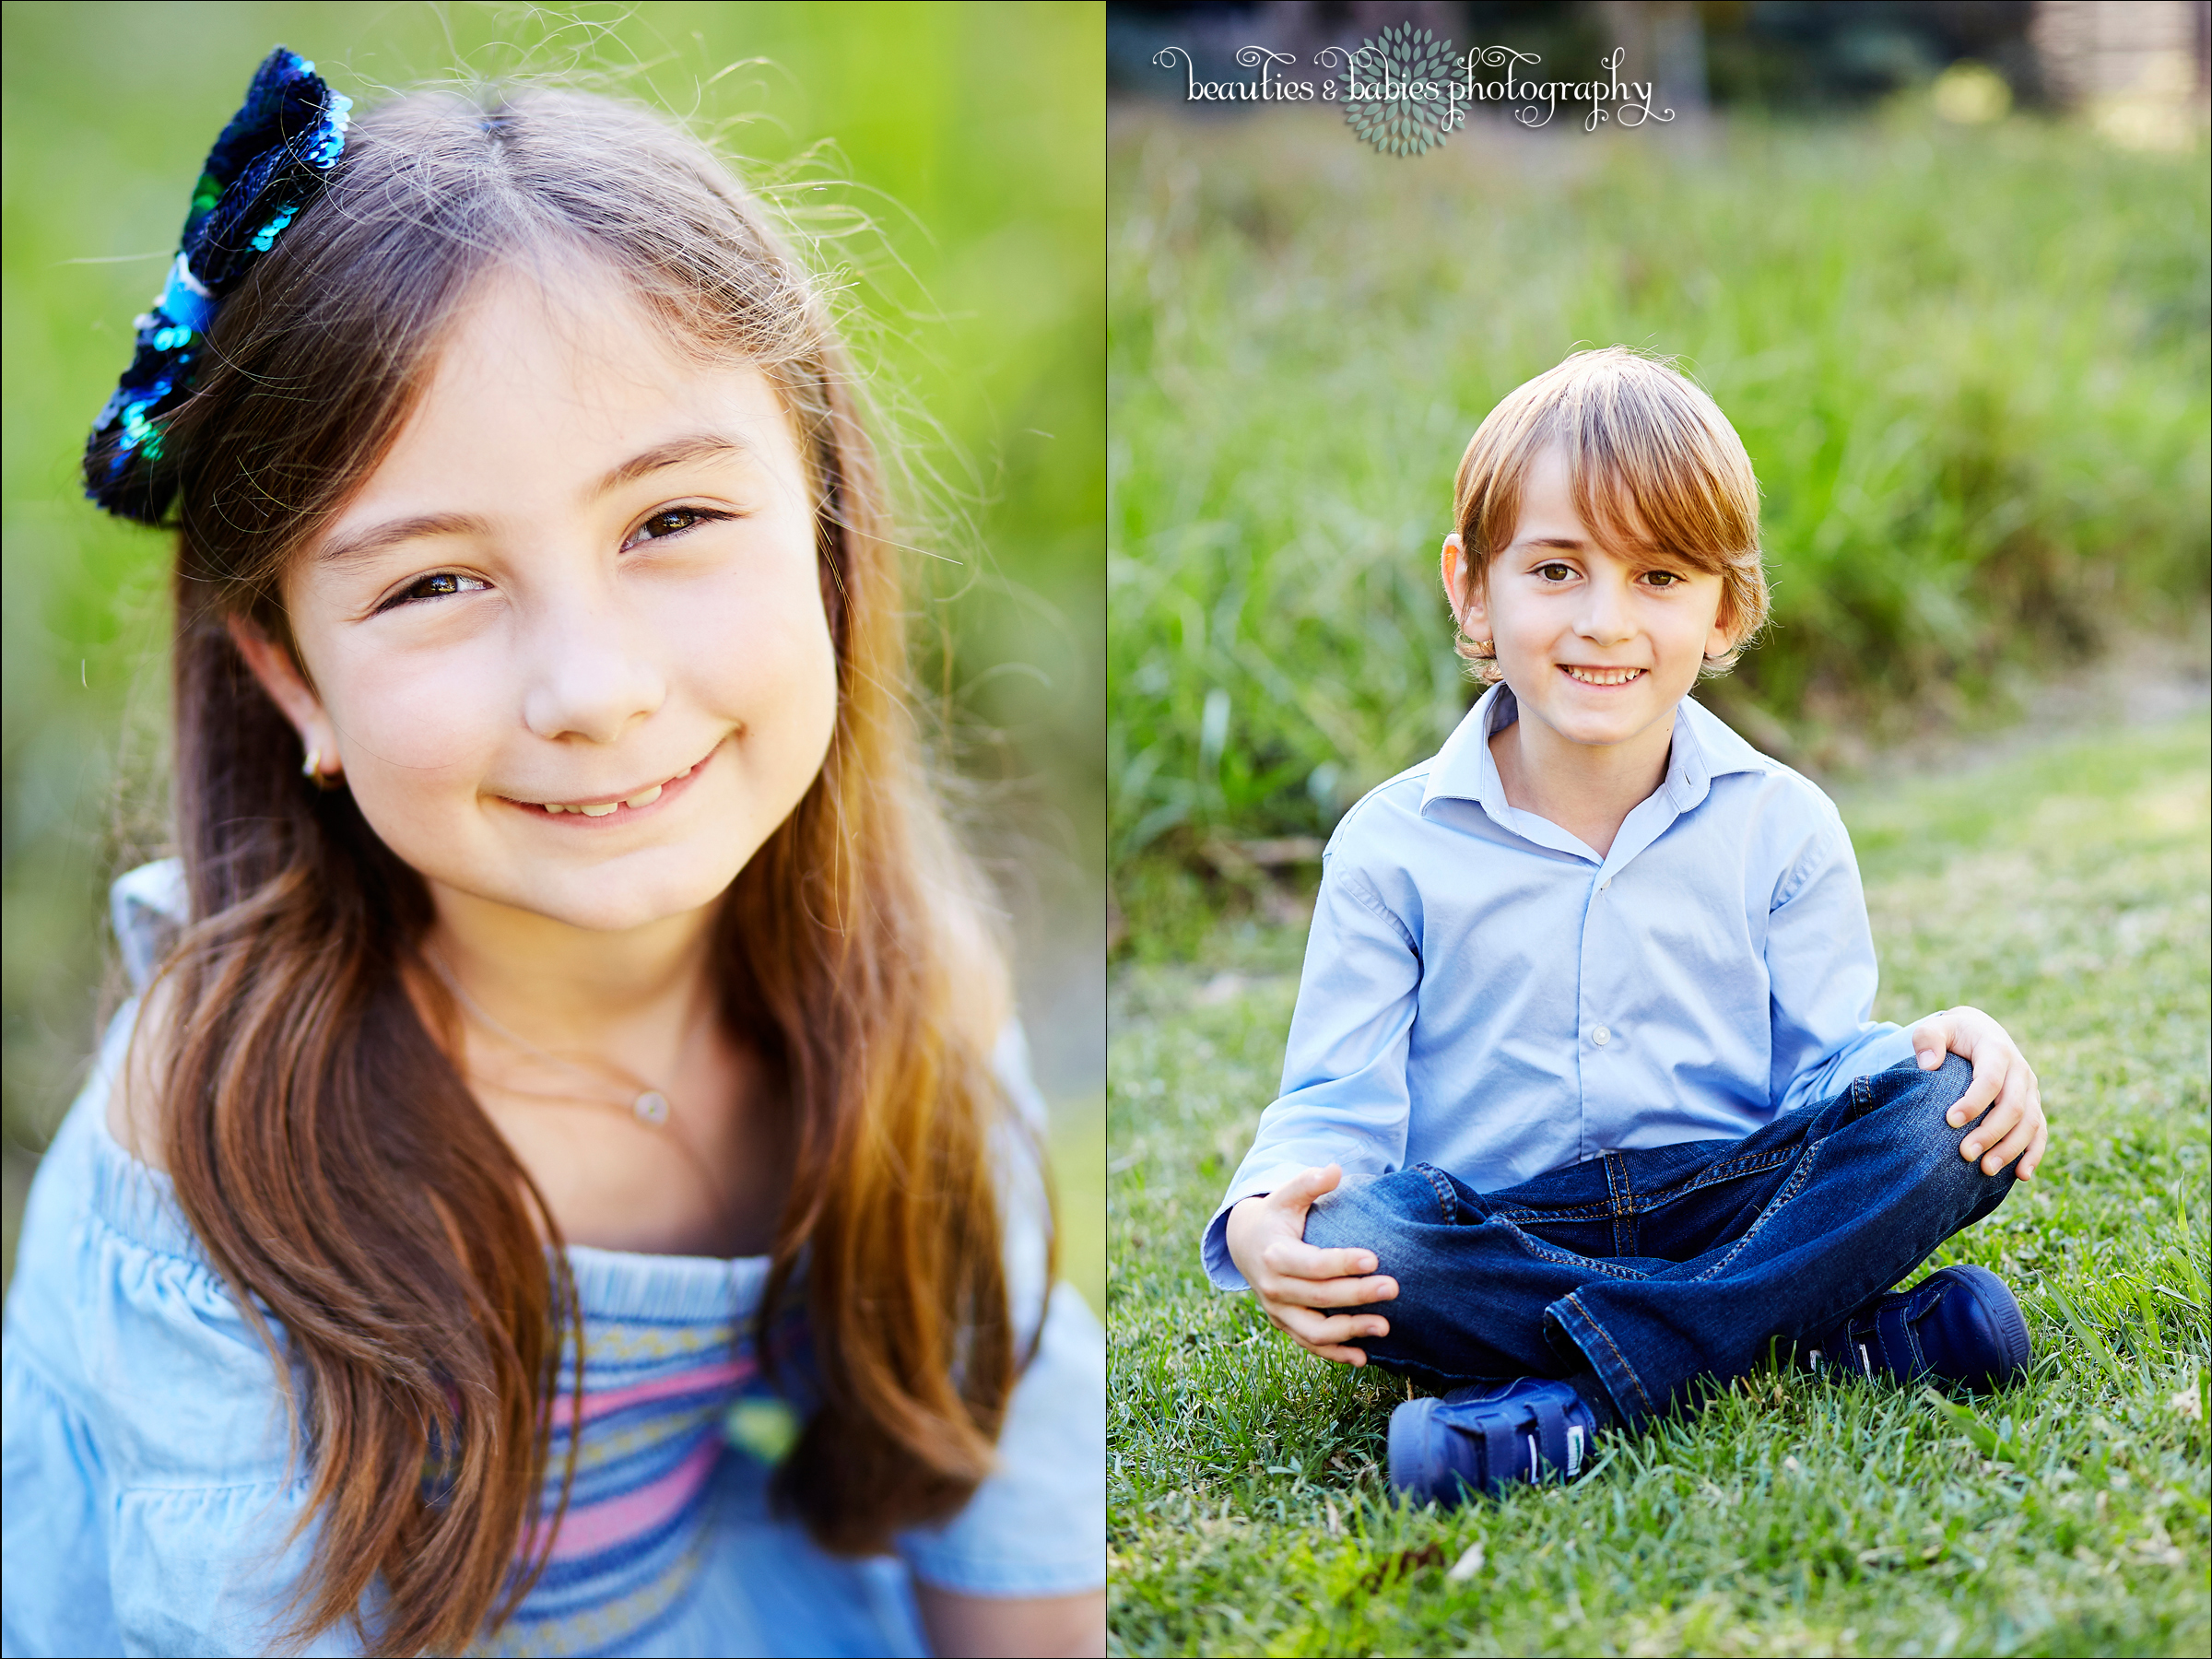 Family Photography Los Angeles, best family photographer Los Angeles, Children's photography Los Angeles photographer, kids portrait photography, Los Angeles family outdoor photography